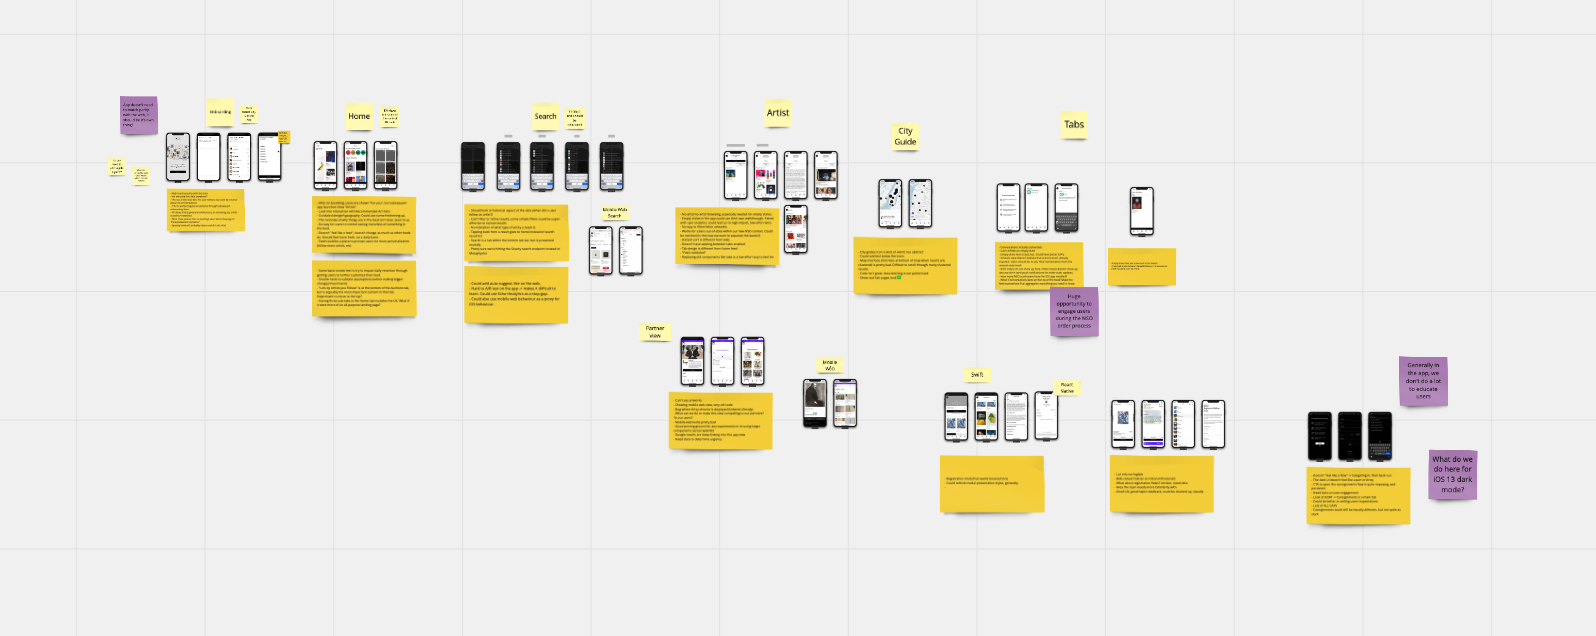 Screenshot of all the screens in our app laid out to discuss